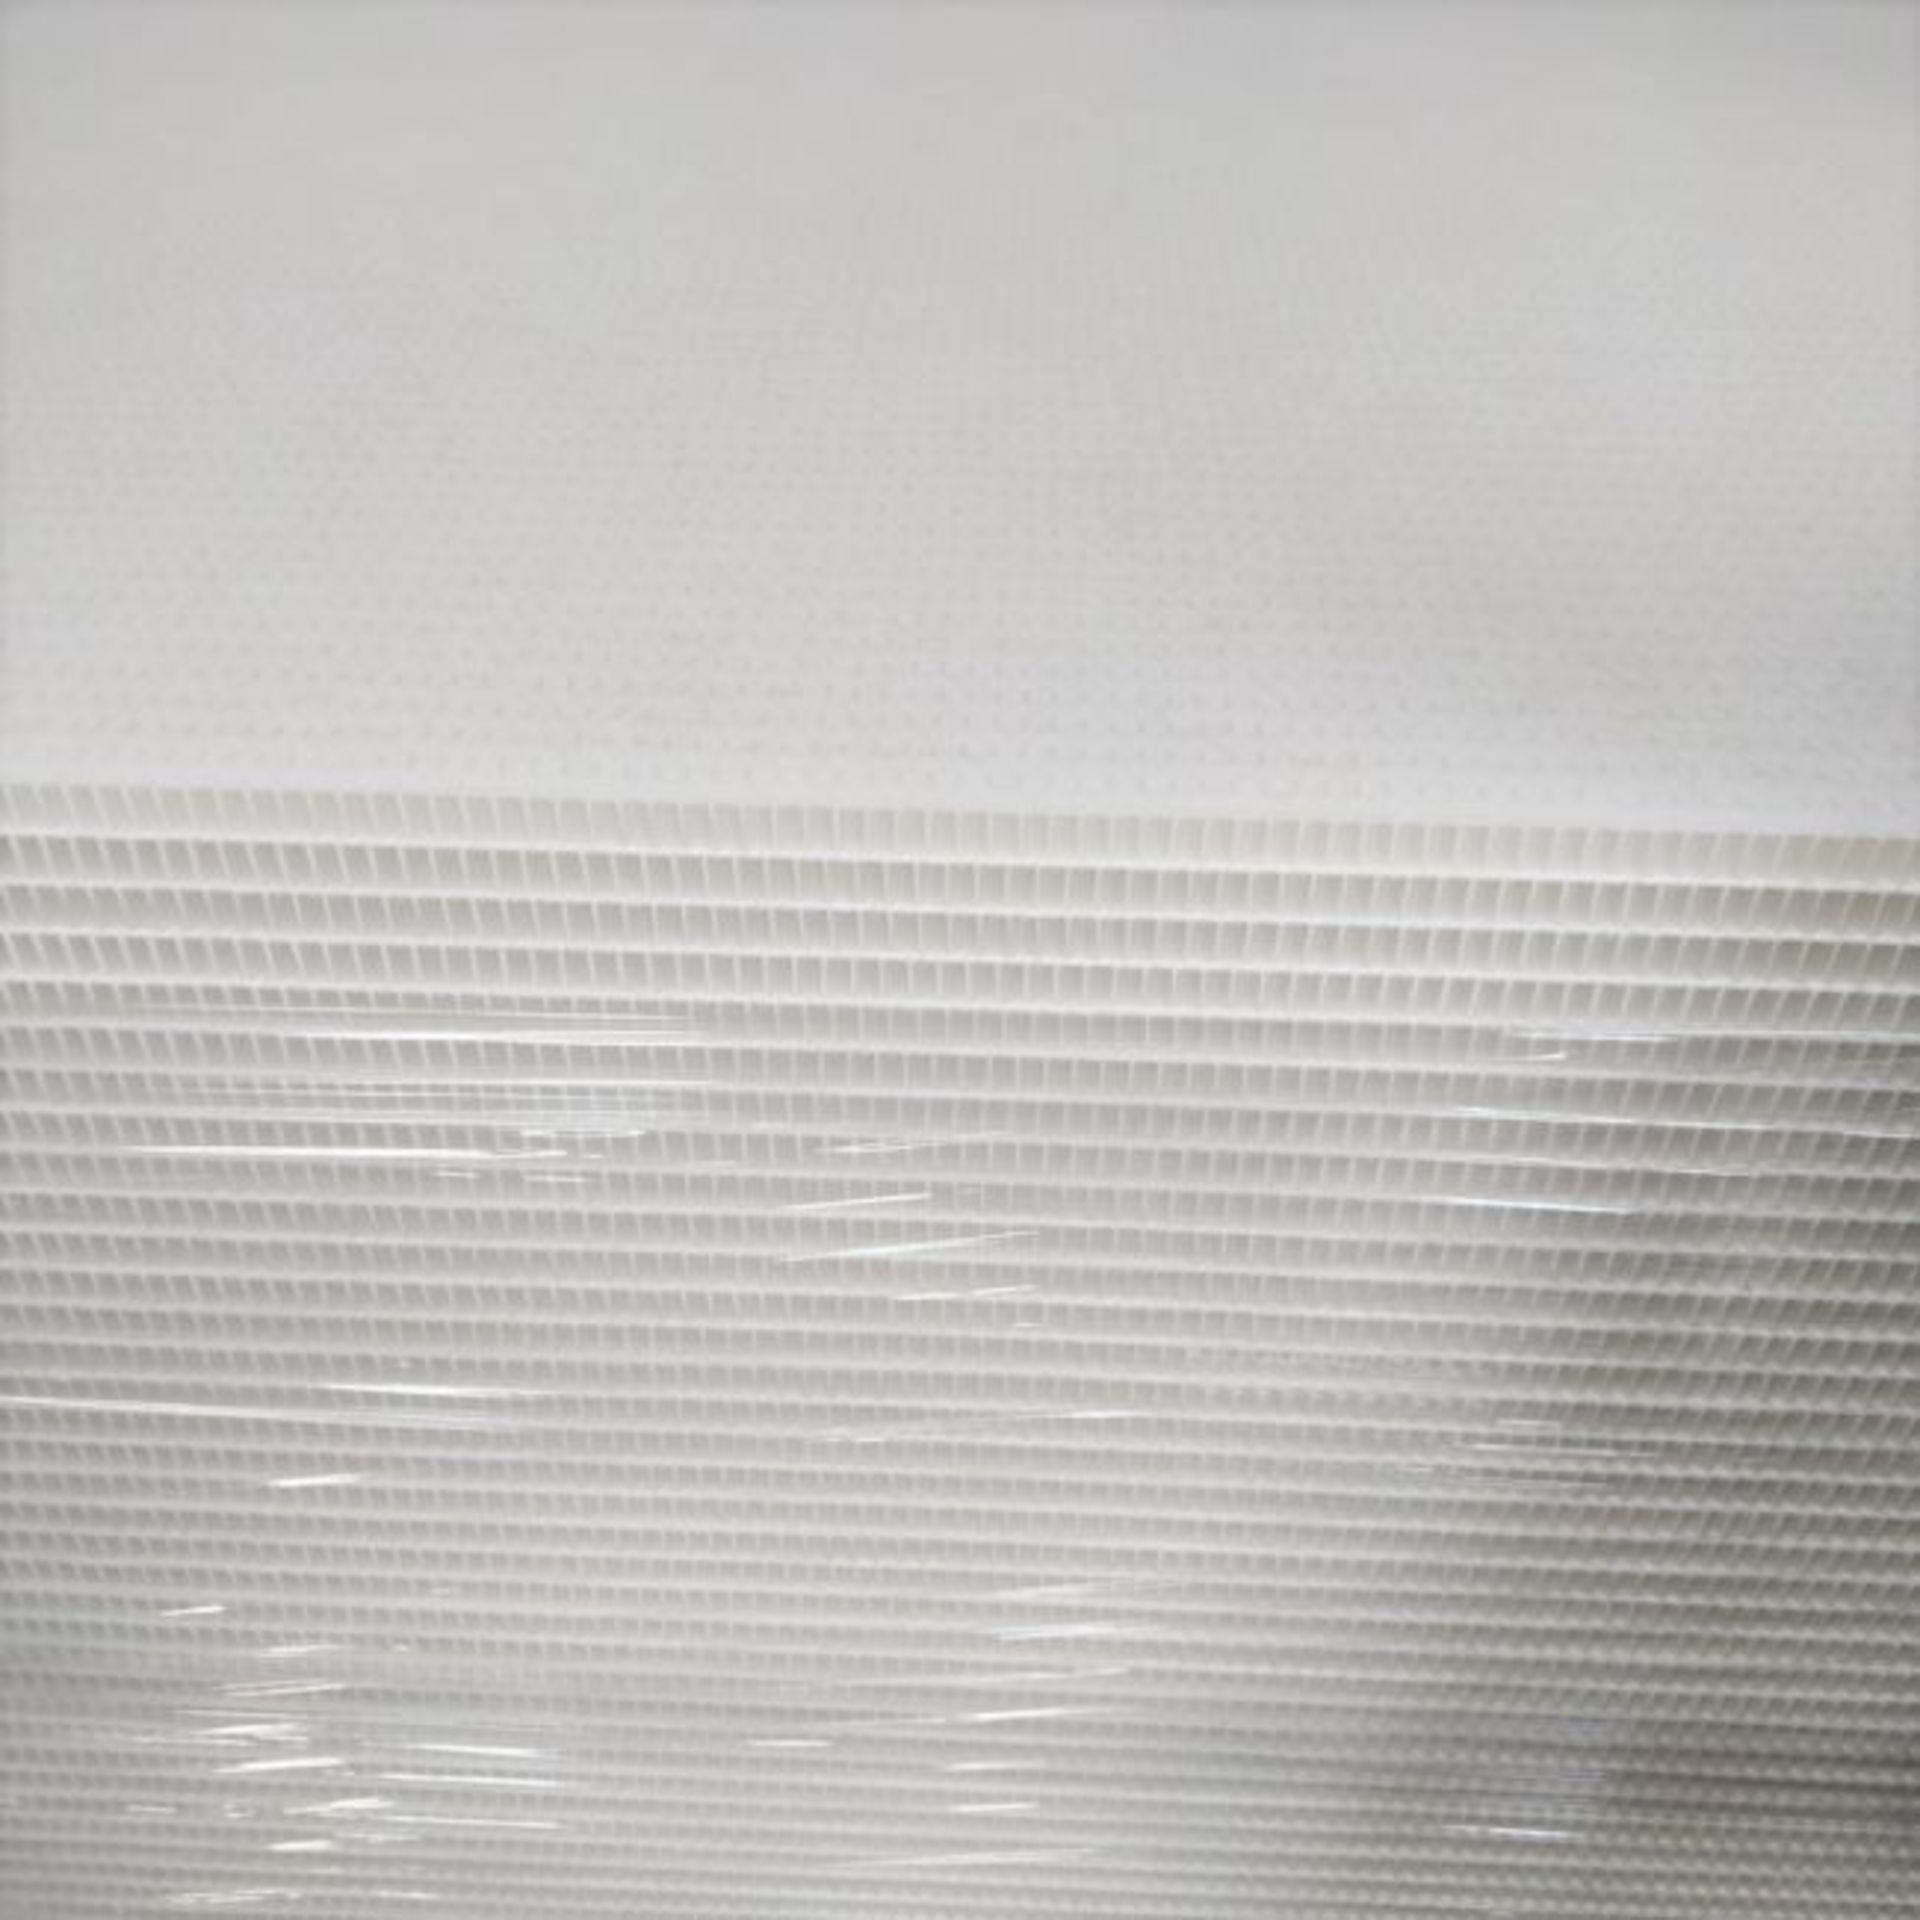 100 x ThermHex Thermoplastic Honeycomb Core Panels - Size: Approx. 2630 x 1210 x 18mm - New - Image 4 of 5